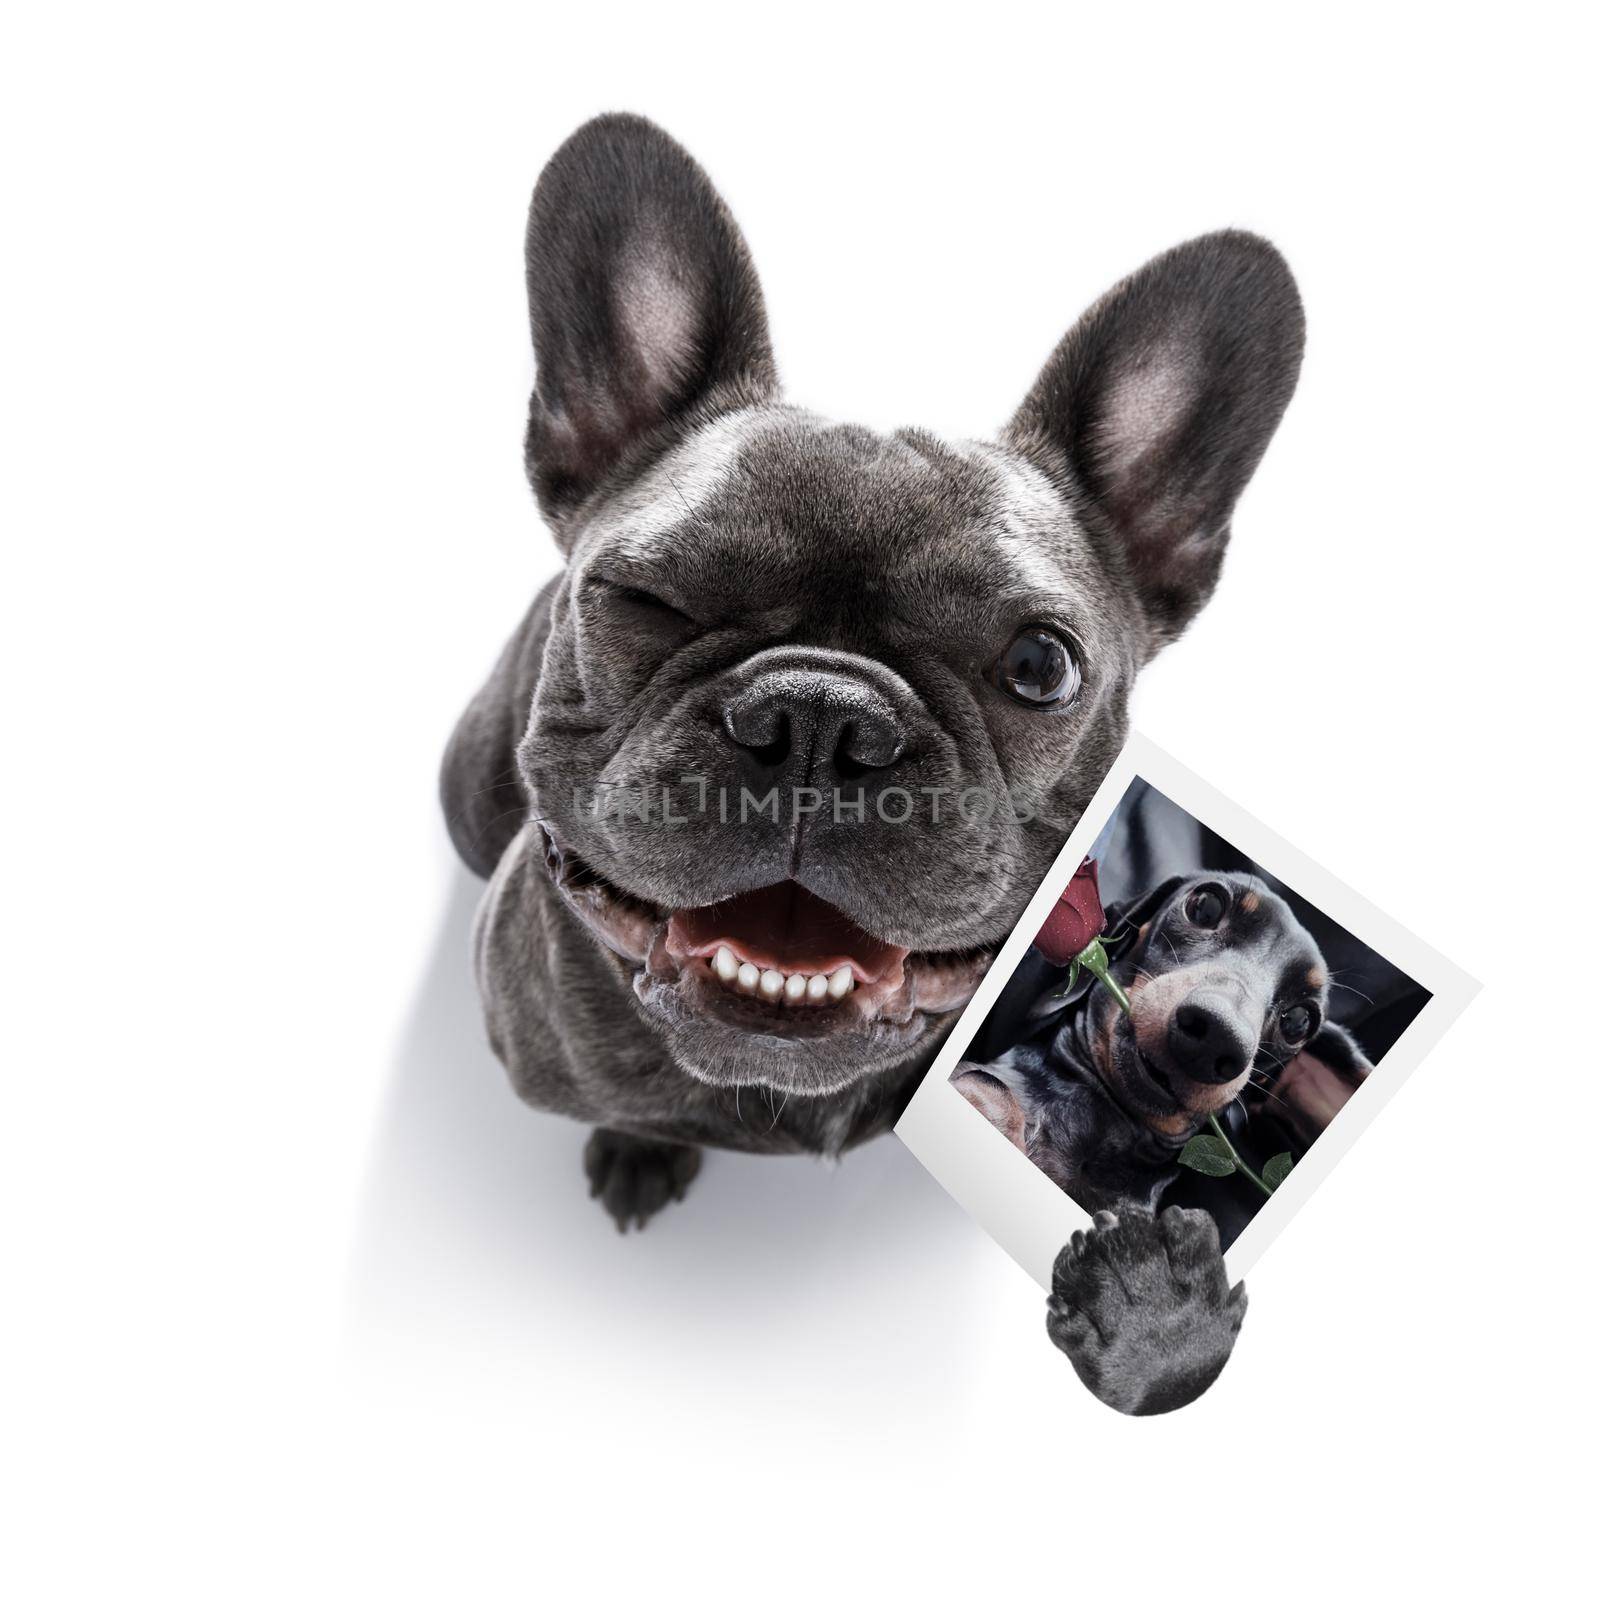 super funny french bulldog dog holding a photograph with old retro style look isolated on white background